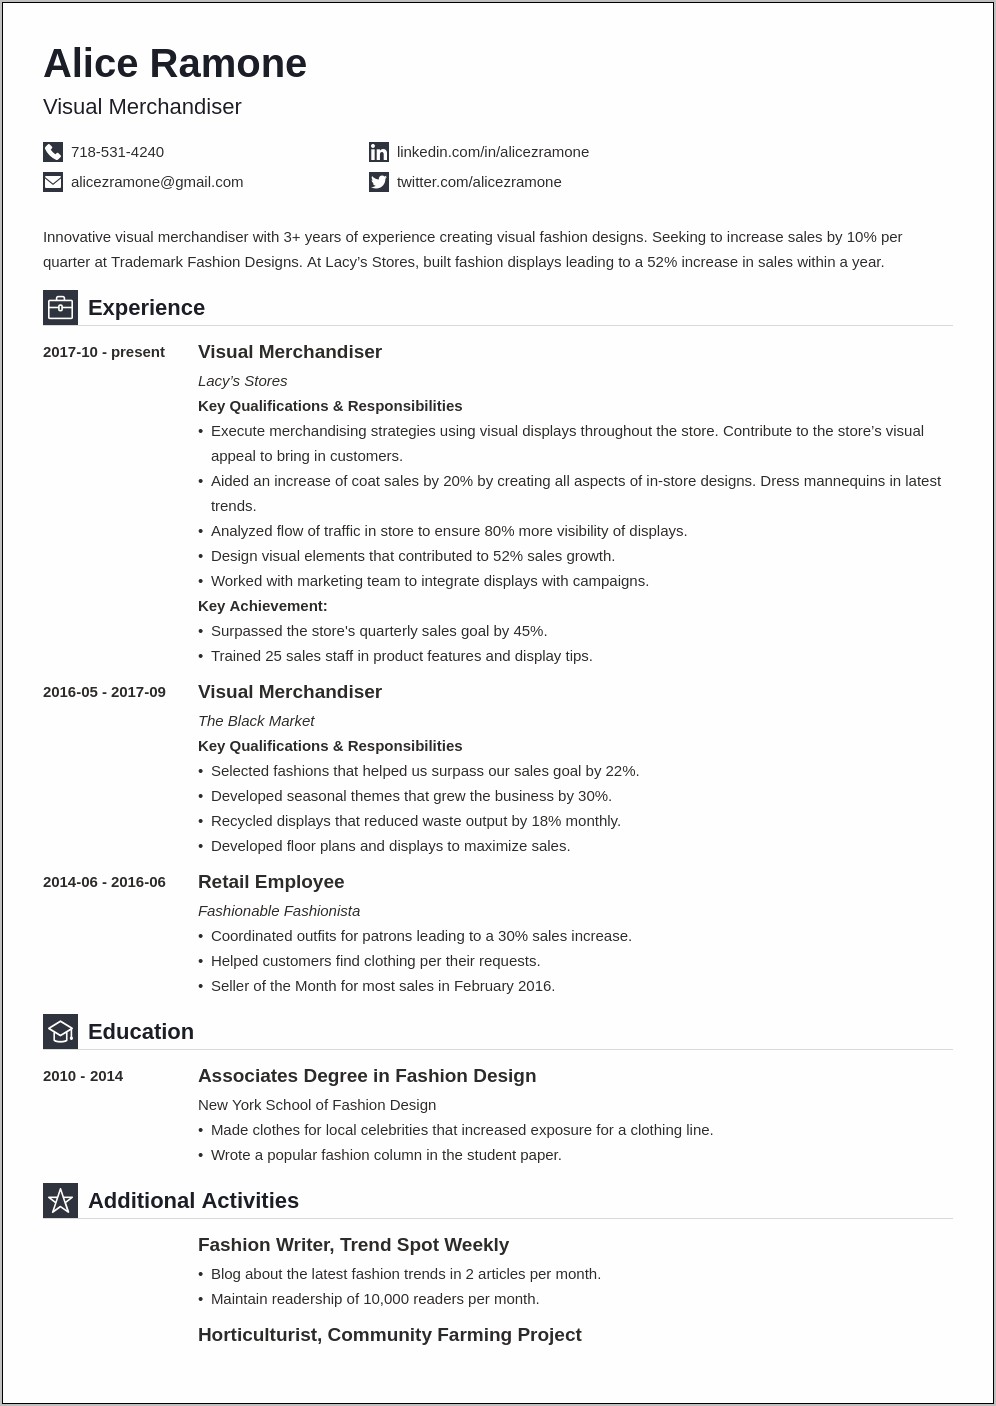 Objective For Merchandising Assistant Resume